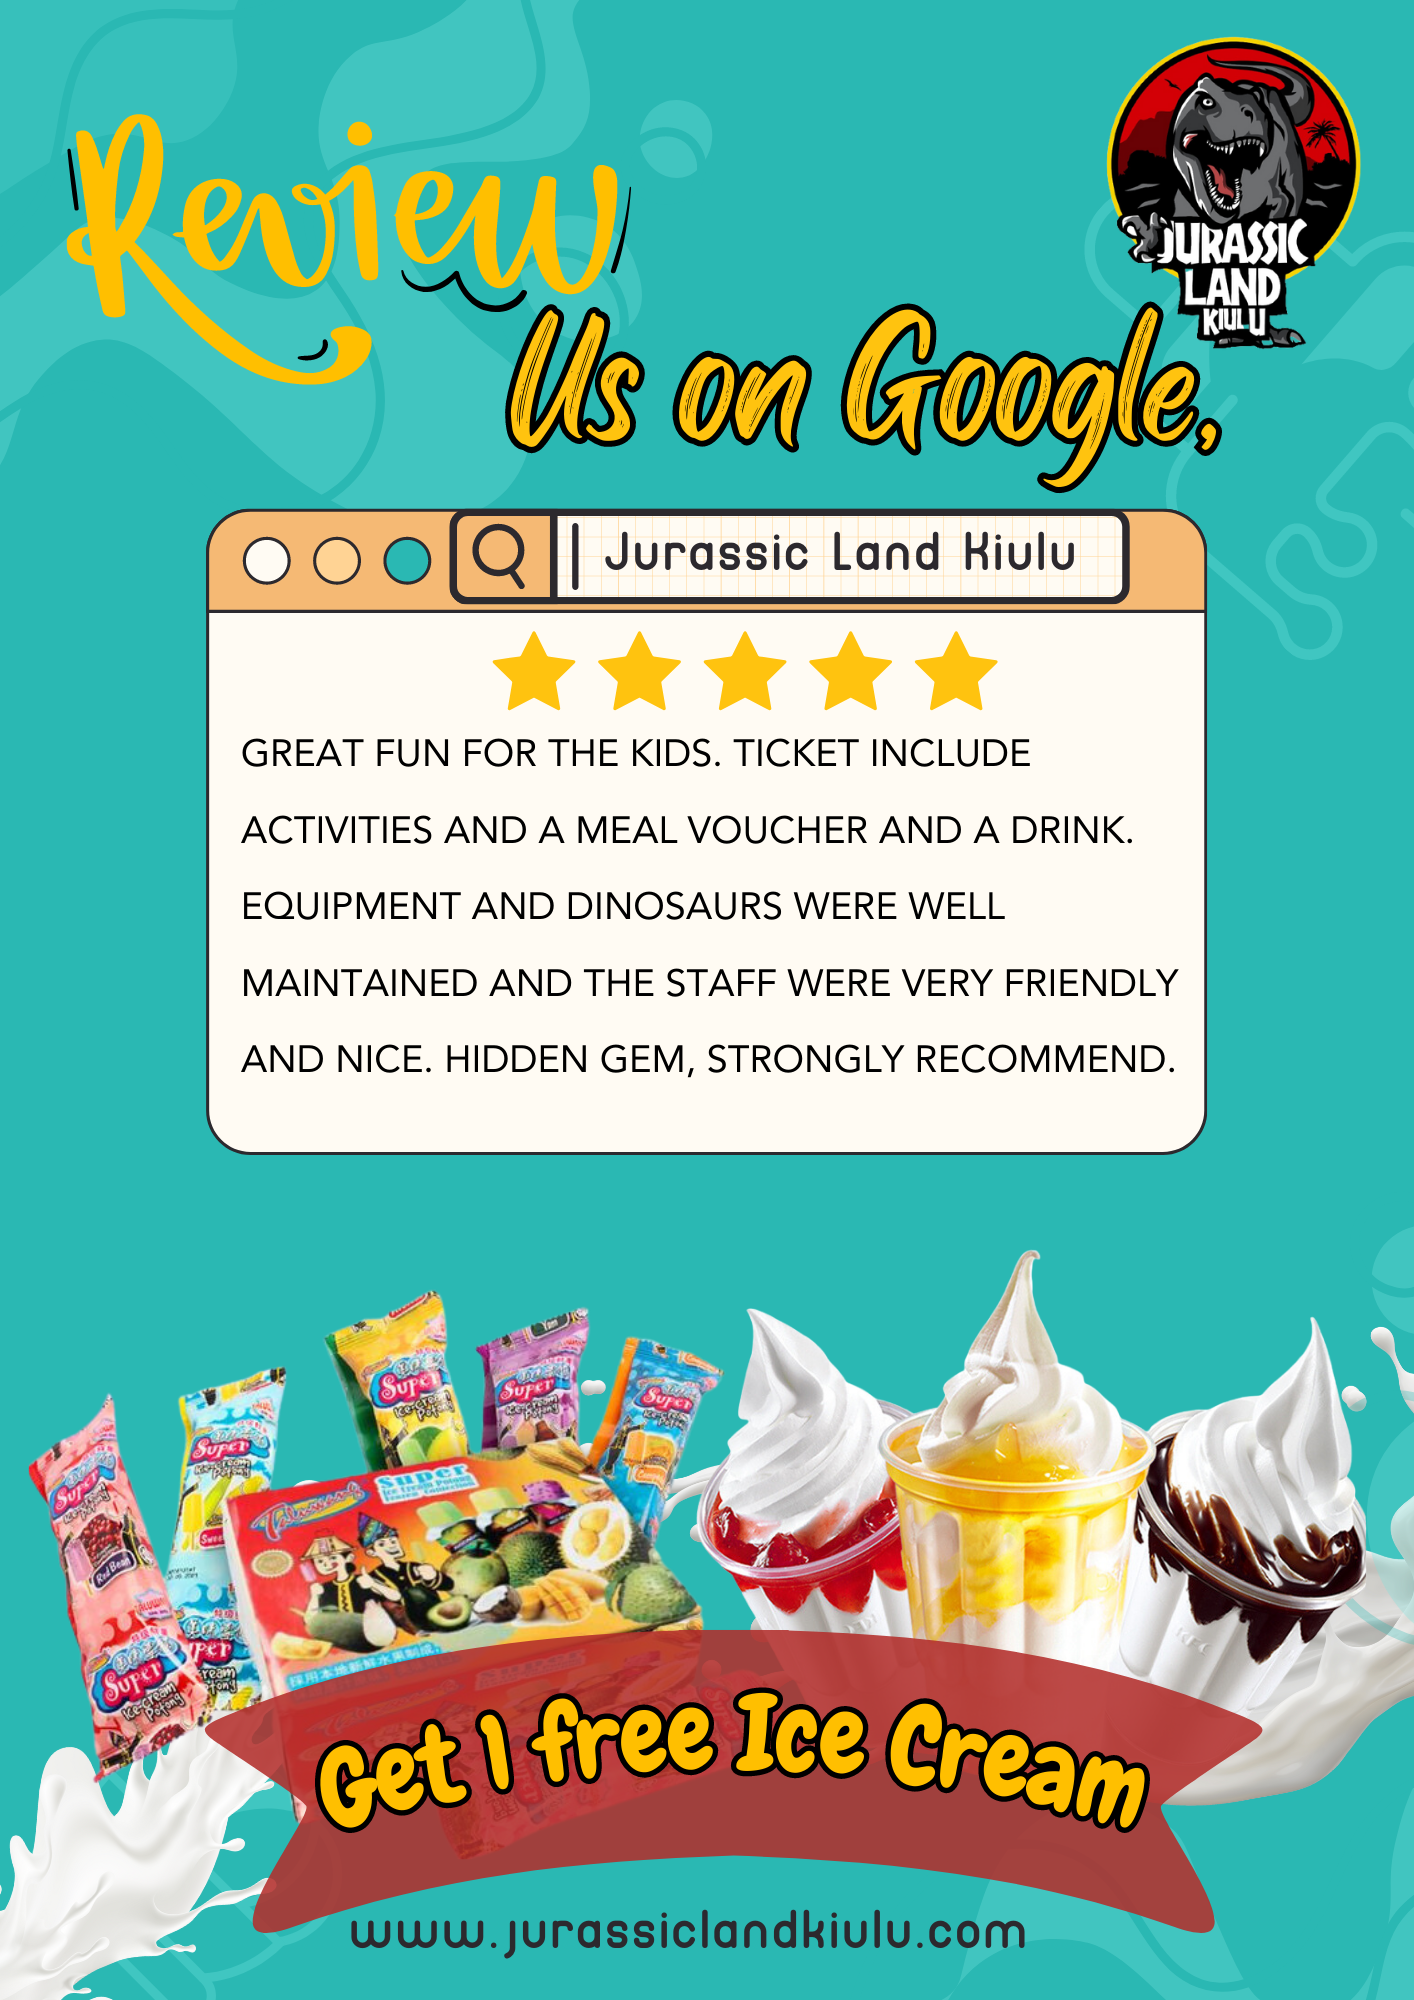 GIVE REVIEW ON GOOGLE AND REDEEM YOUR FREE ICE CREAM